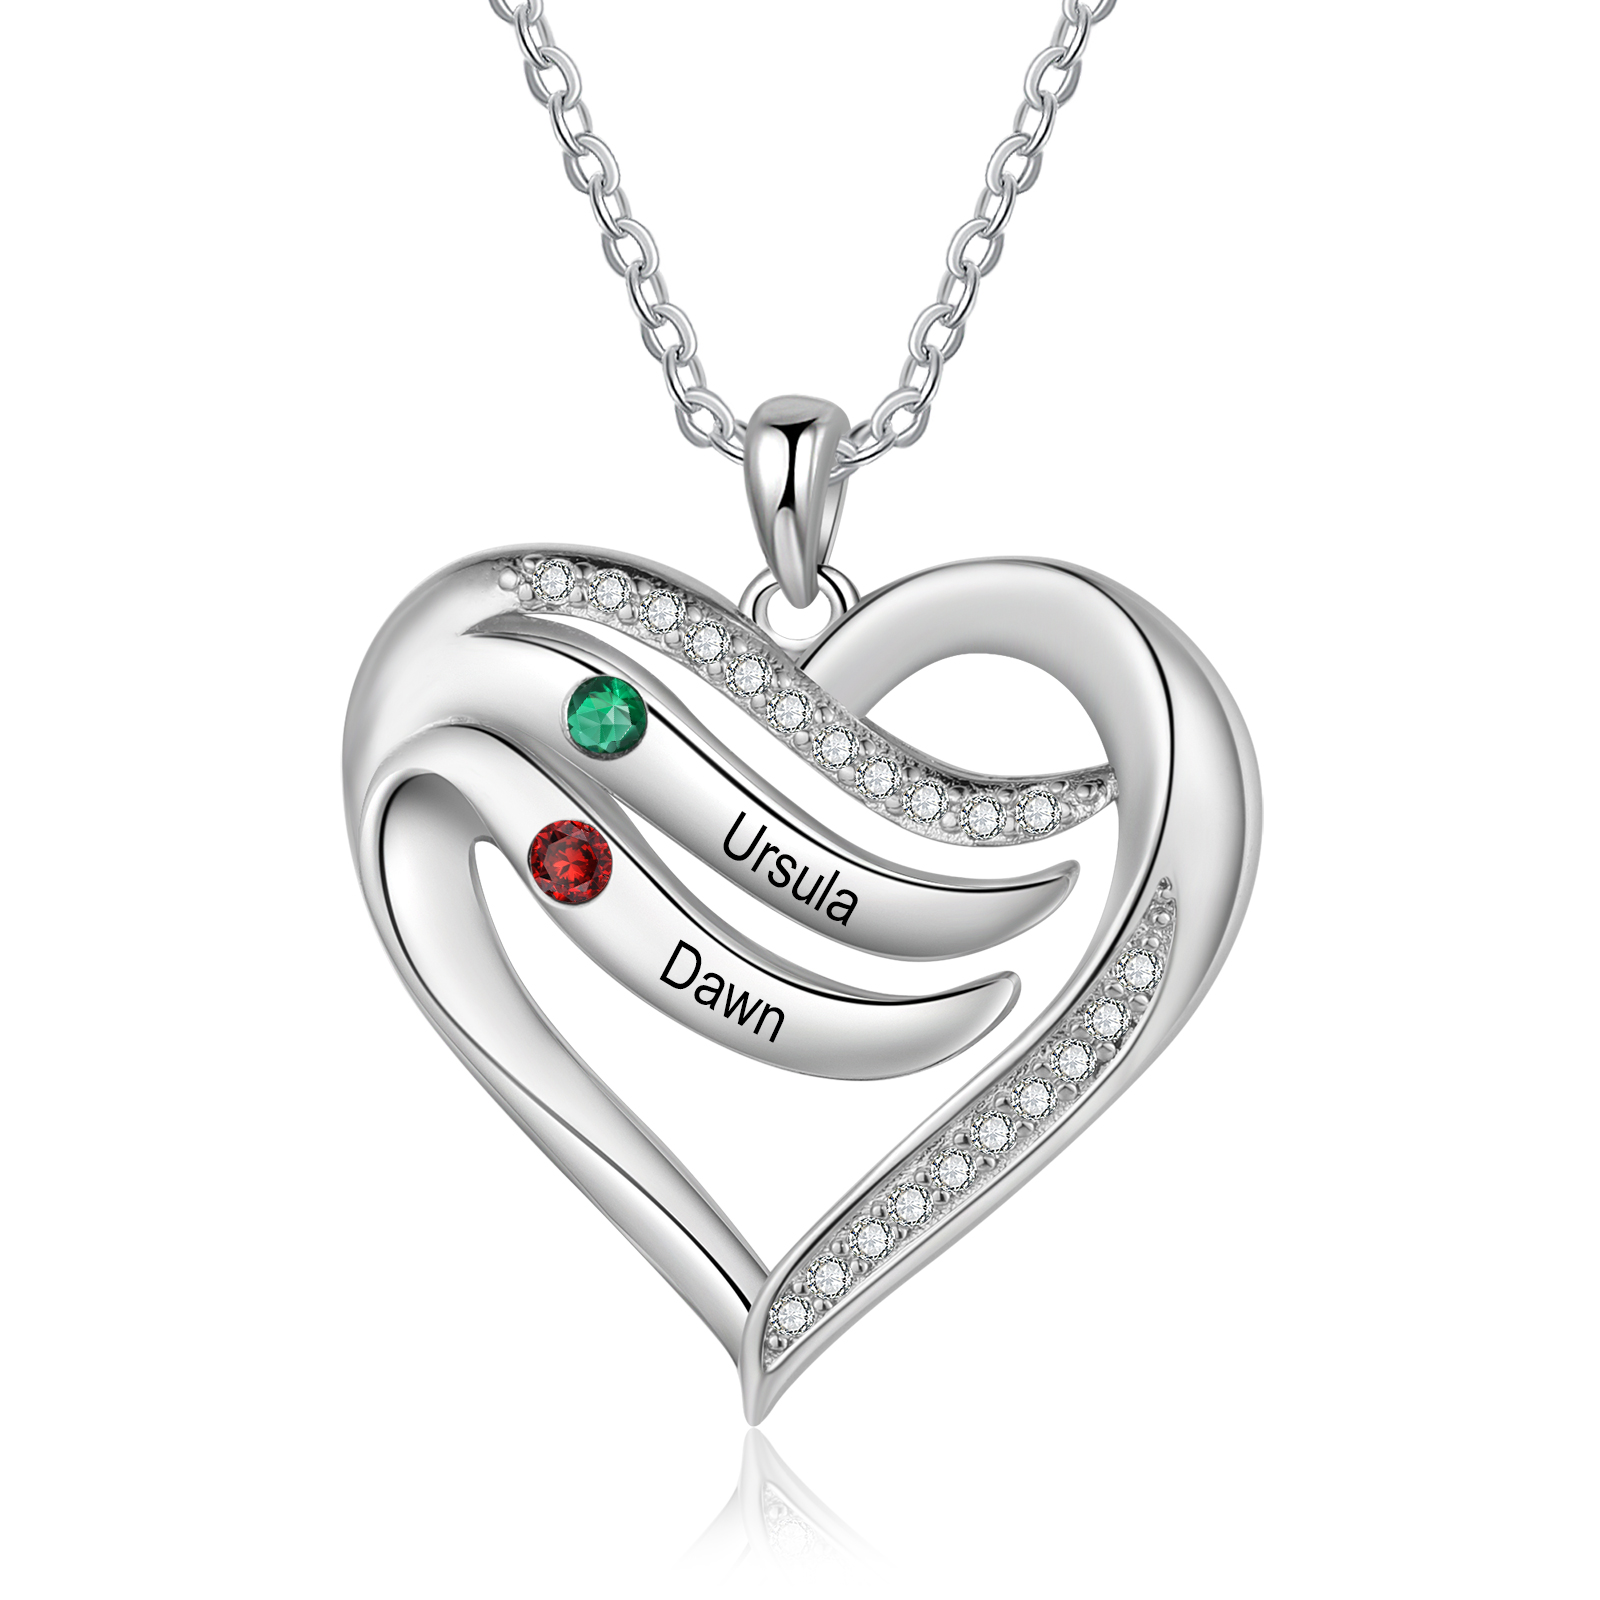 2 Names - Personalized Heart Necklace in Silver with Birthstone and Name Beautiful Gift for Her